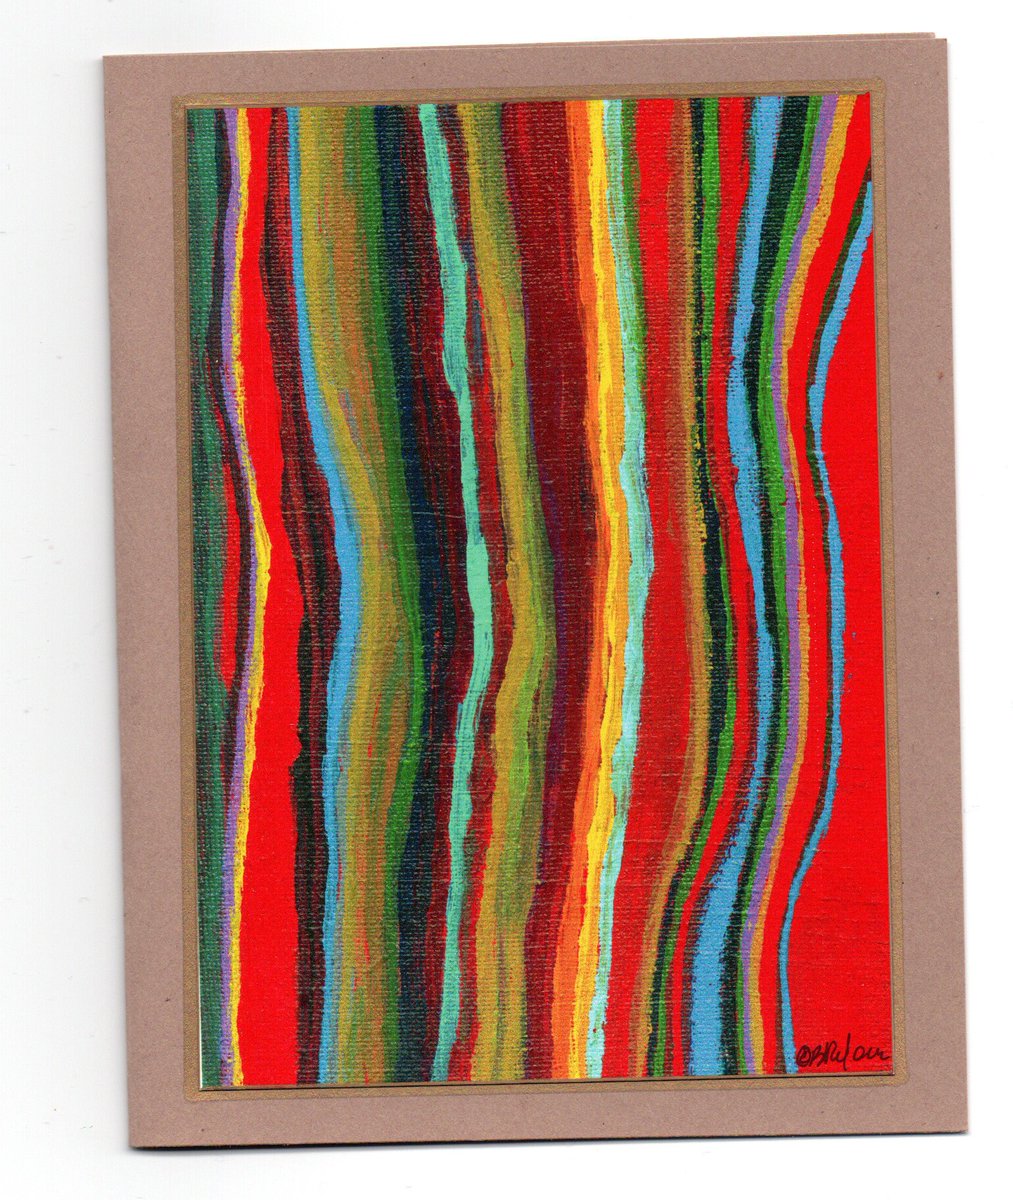 Note Card Stationery Abstract Art Red Yellow Blue Green tuppu.net/79e9577f #noteworthycrafts #Etsy #ArtReproduction